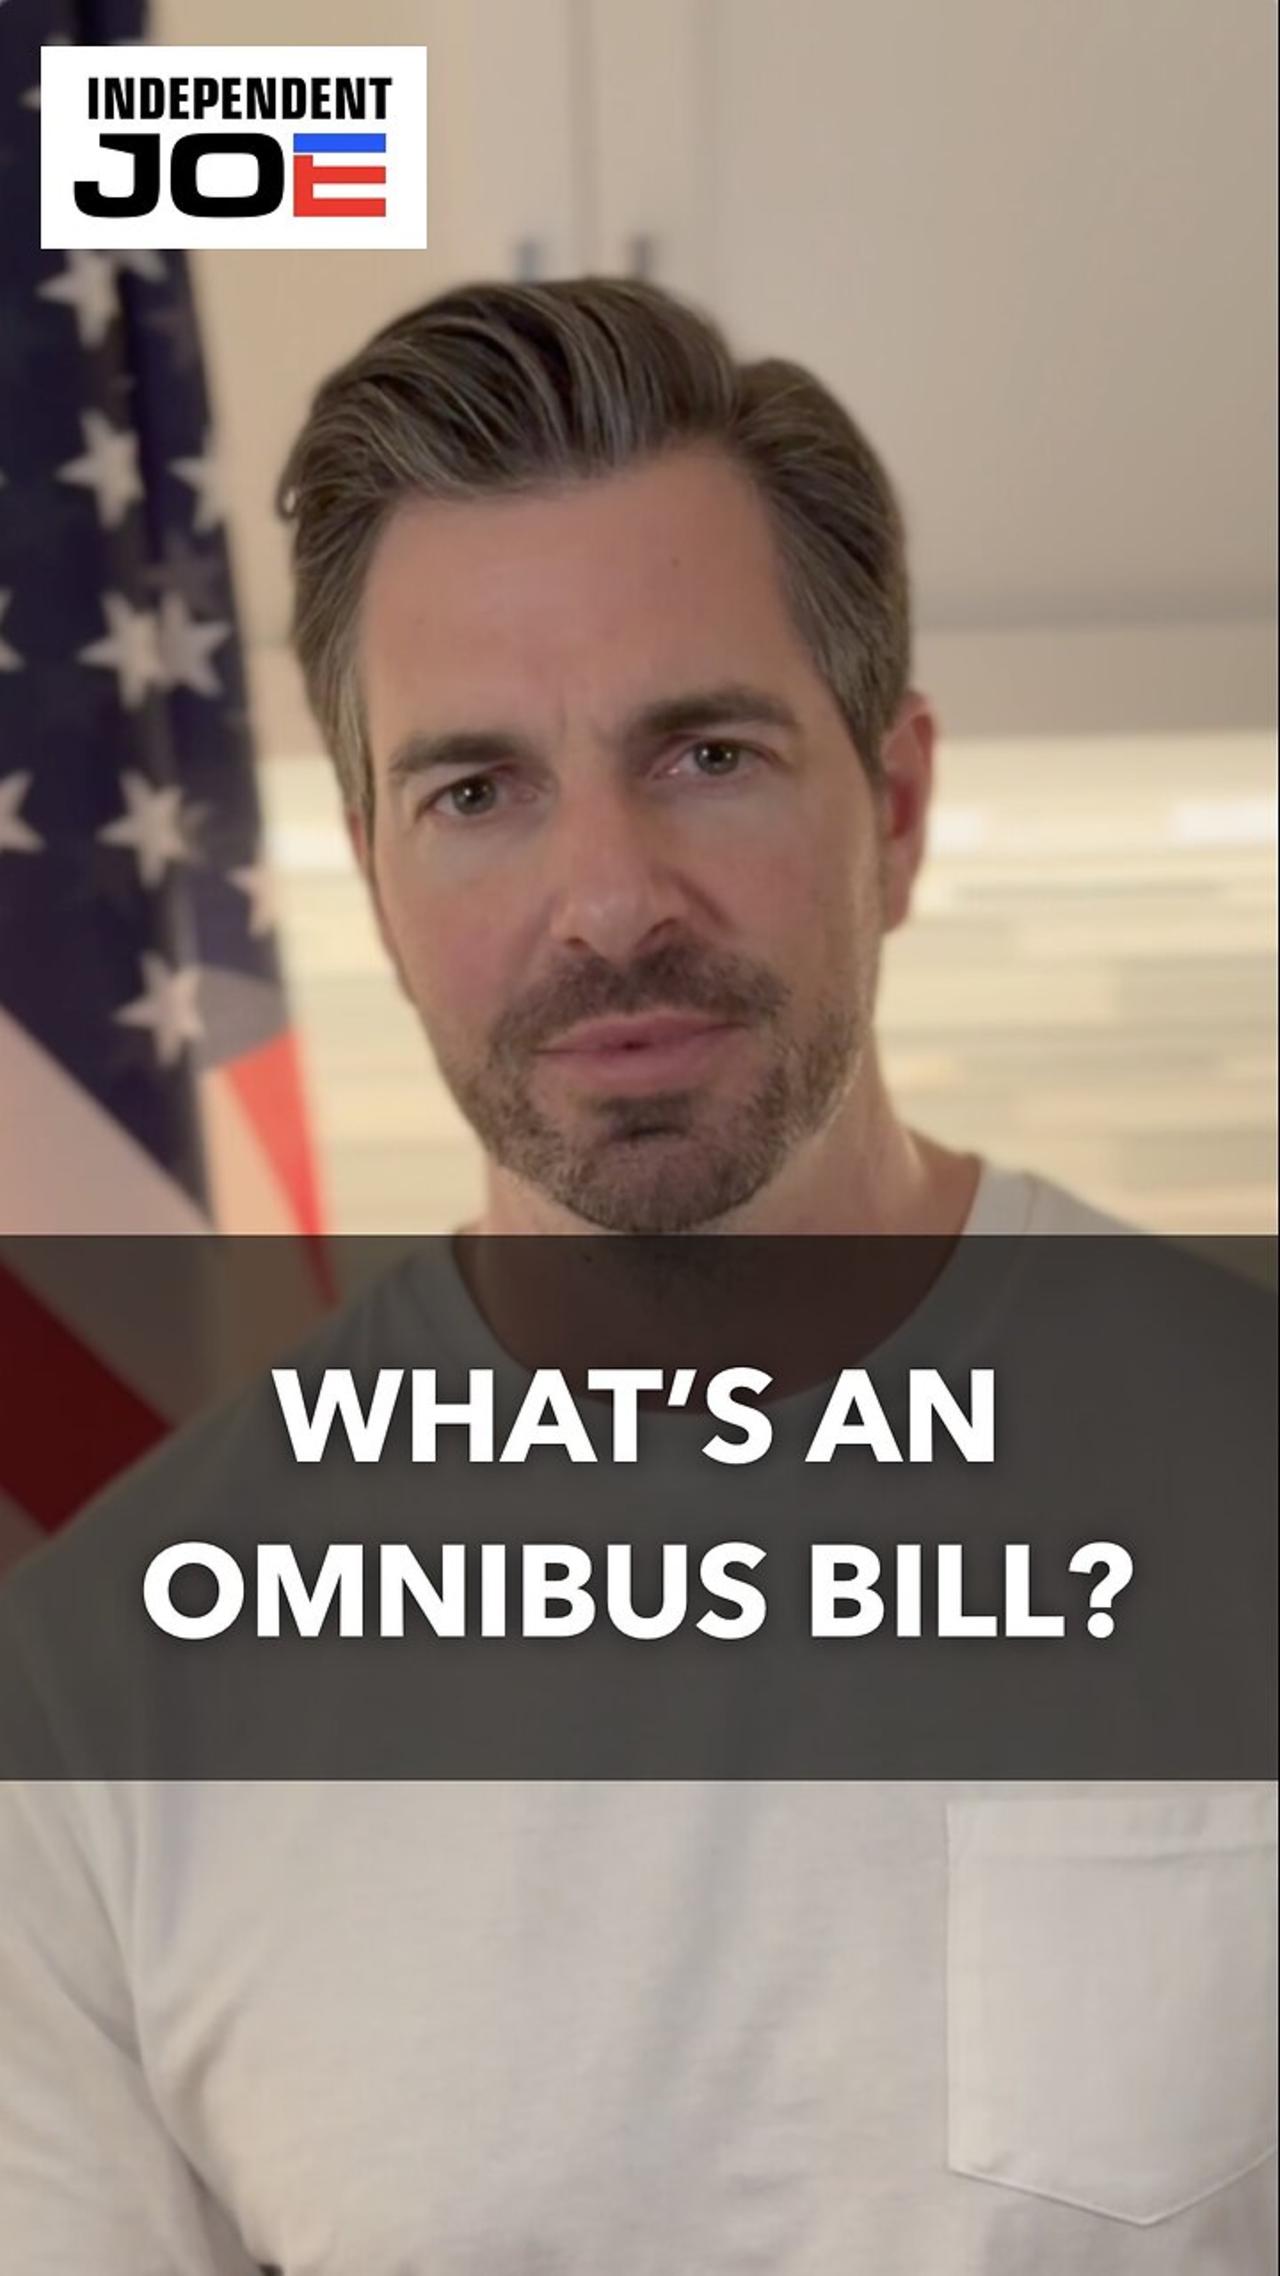 What's an omnibus bill?